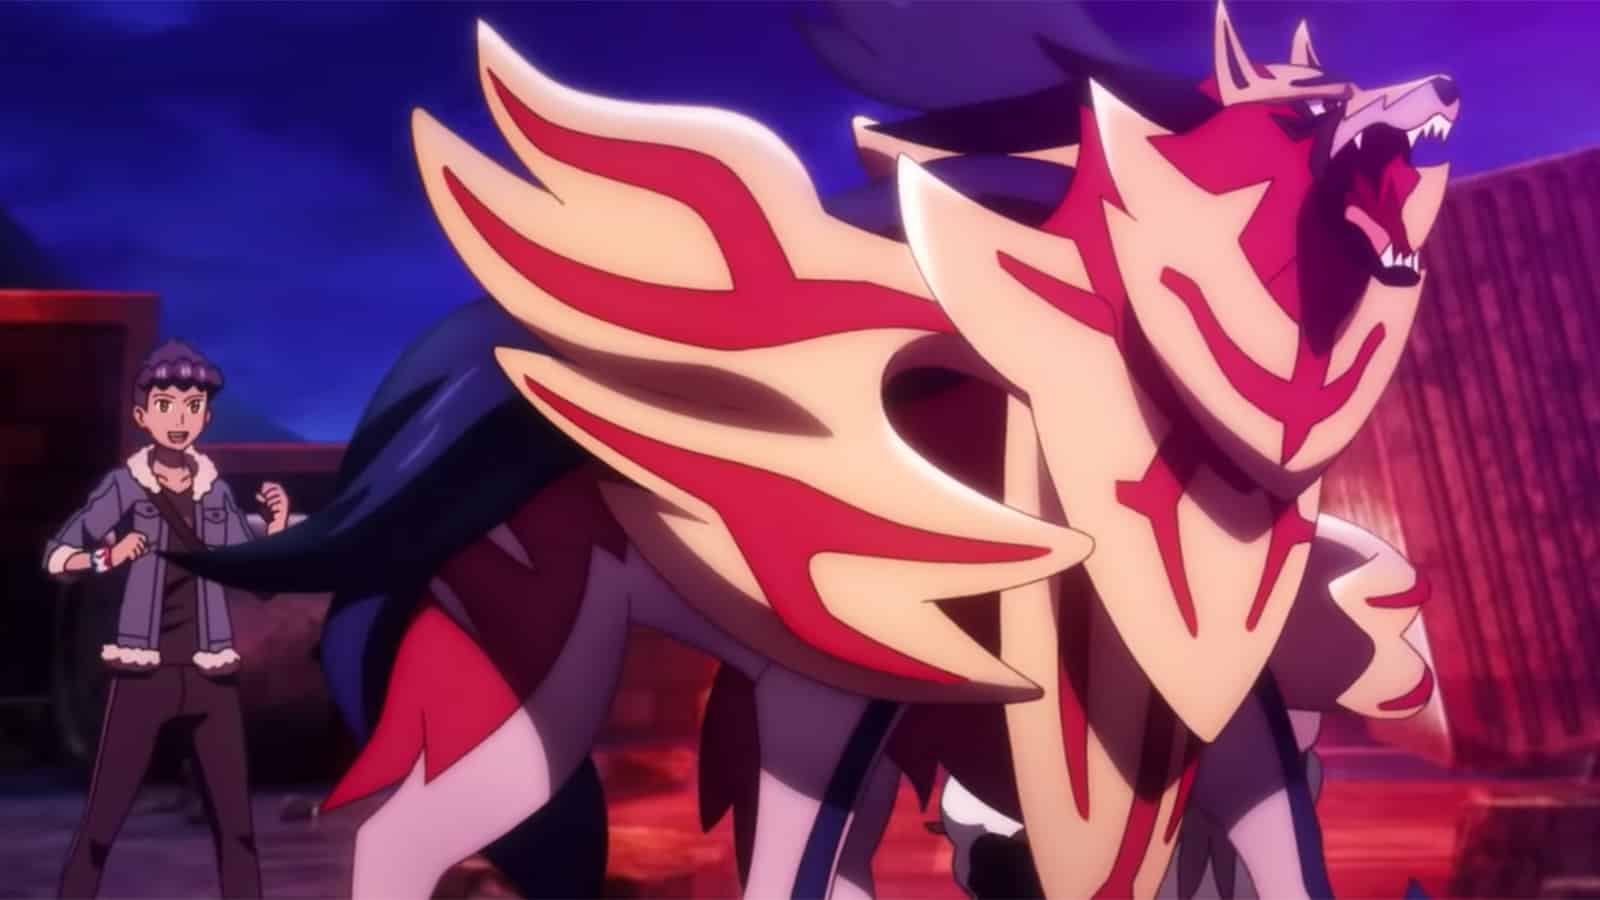 How to watch Pokemon Evolutions anime Episode 1: Release dates, trailer,  more - Dexerto